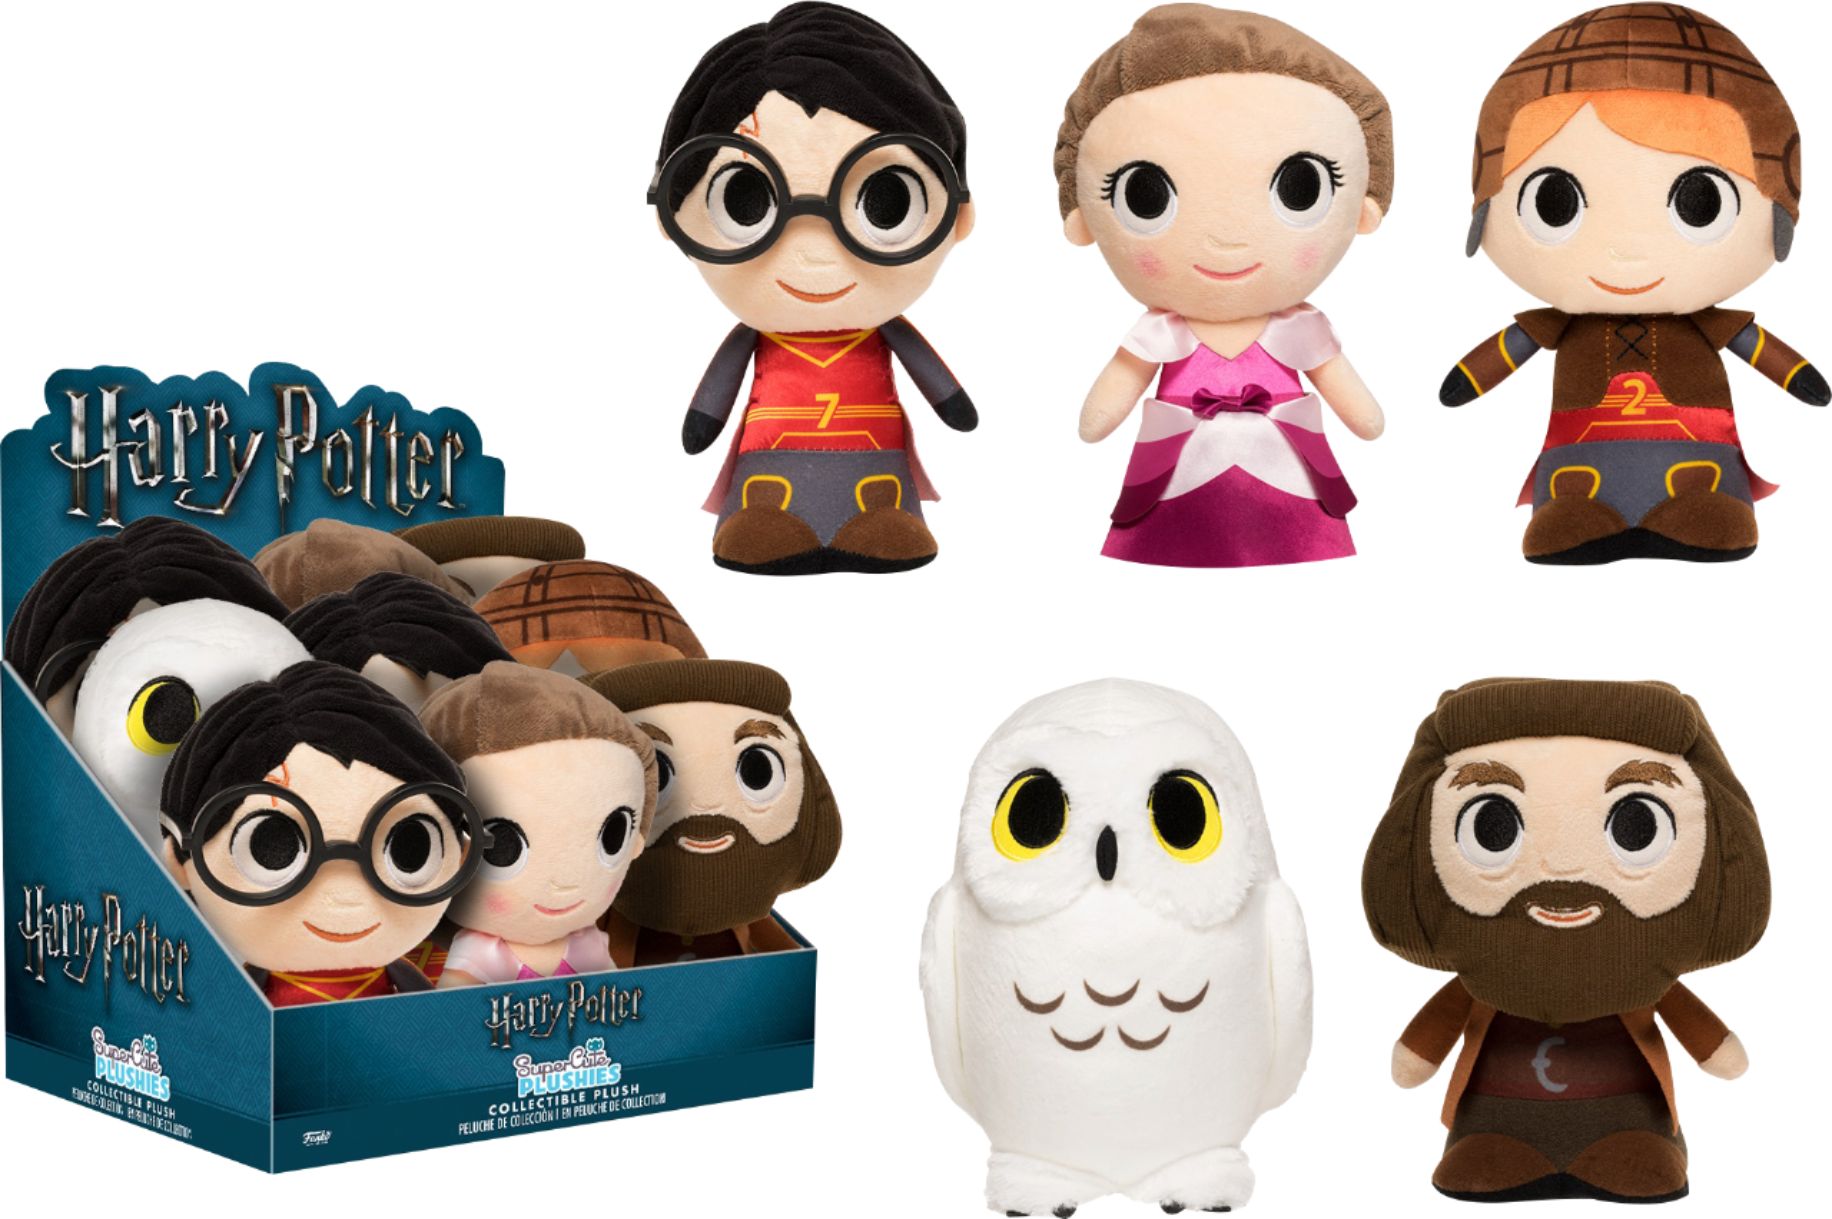 NEW Harry Potter Super Cute Plushies by Funko 